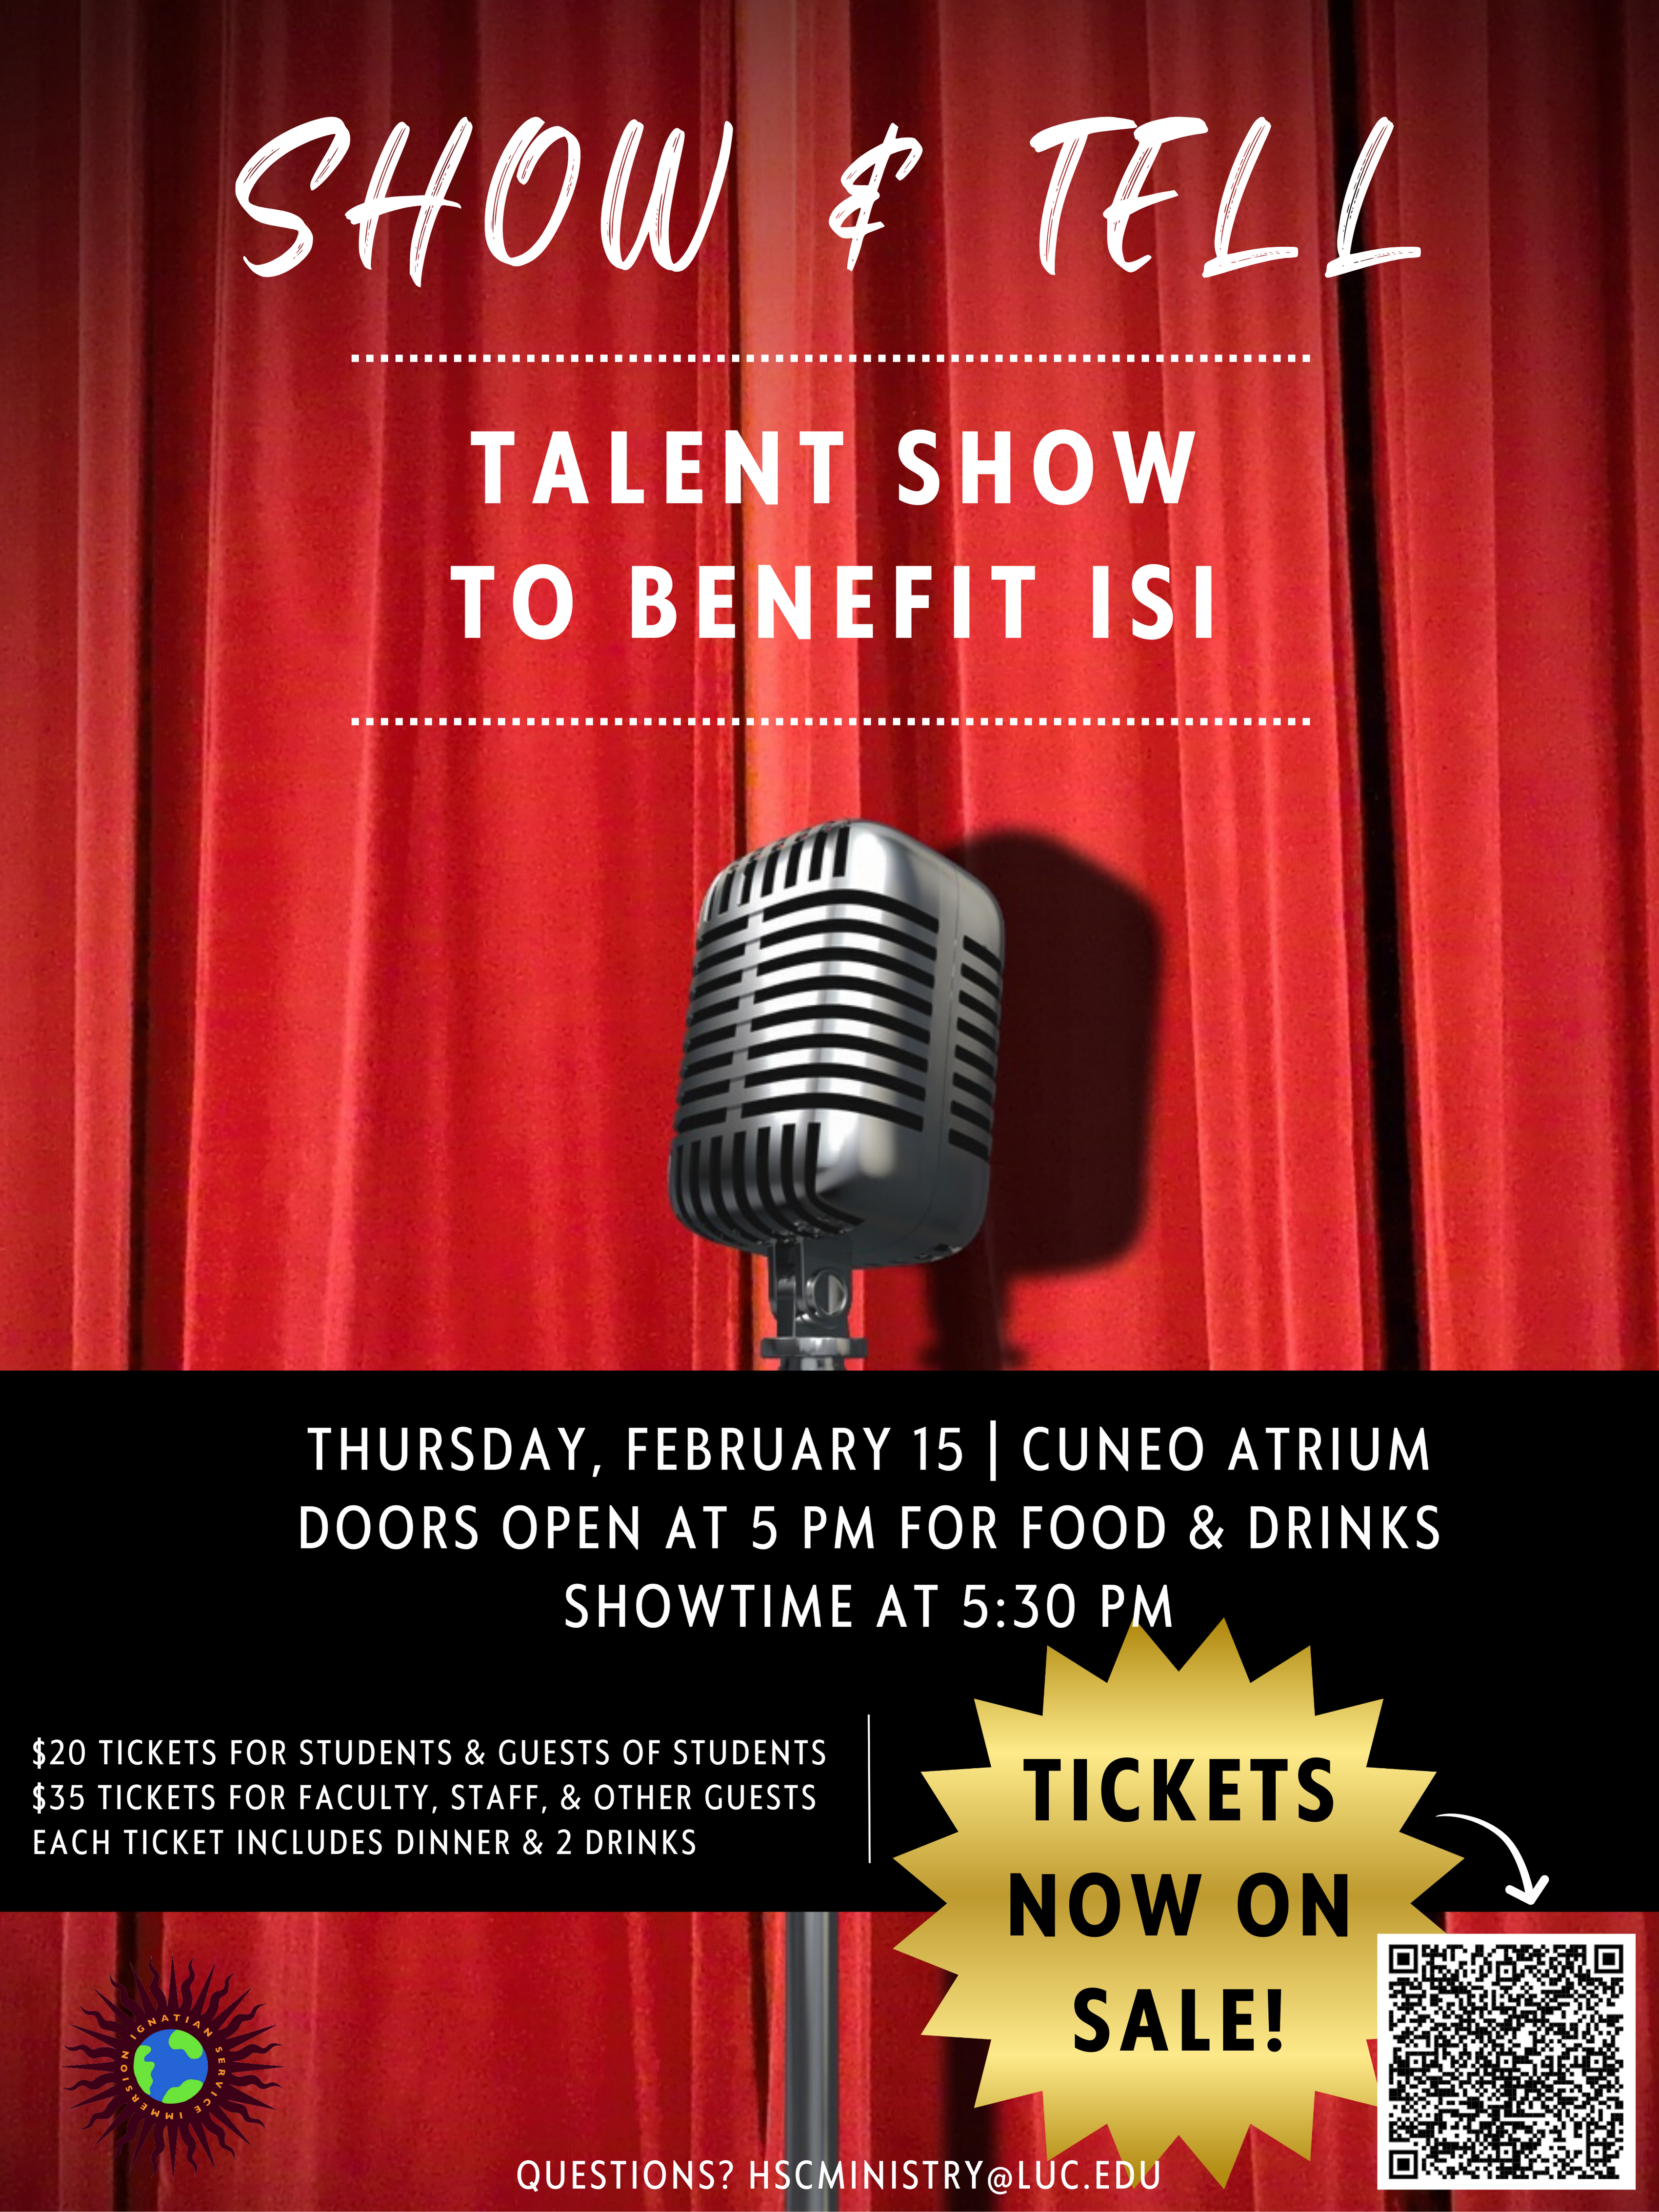 The flier for the 2024 ISI benefit talent show taking place Thursday, February 15, in the Cuneo Atrium. Doors open at 5 for food and drinks, show starts at 5:30. Tickets now available at luc.edu/ShowAndTell.